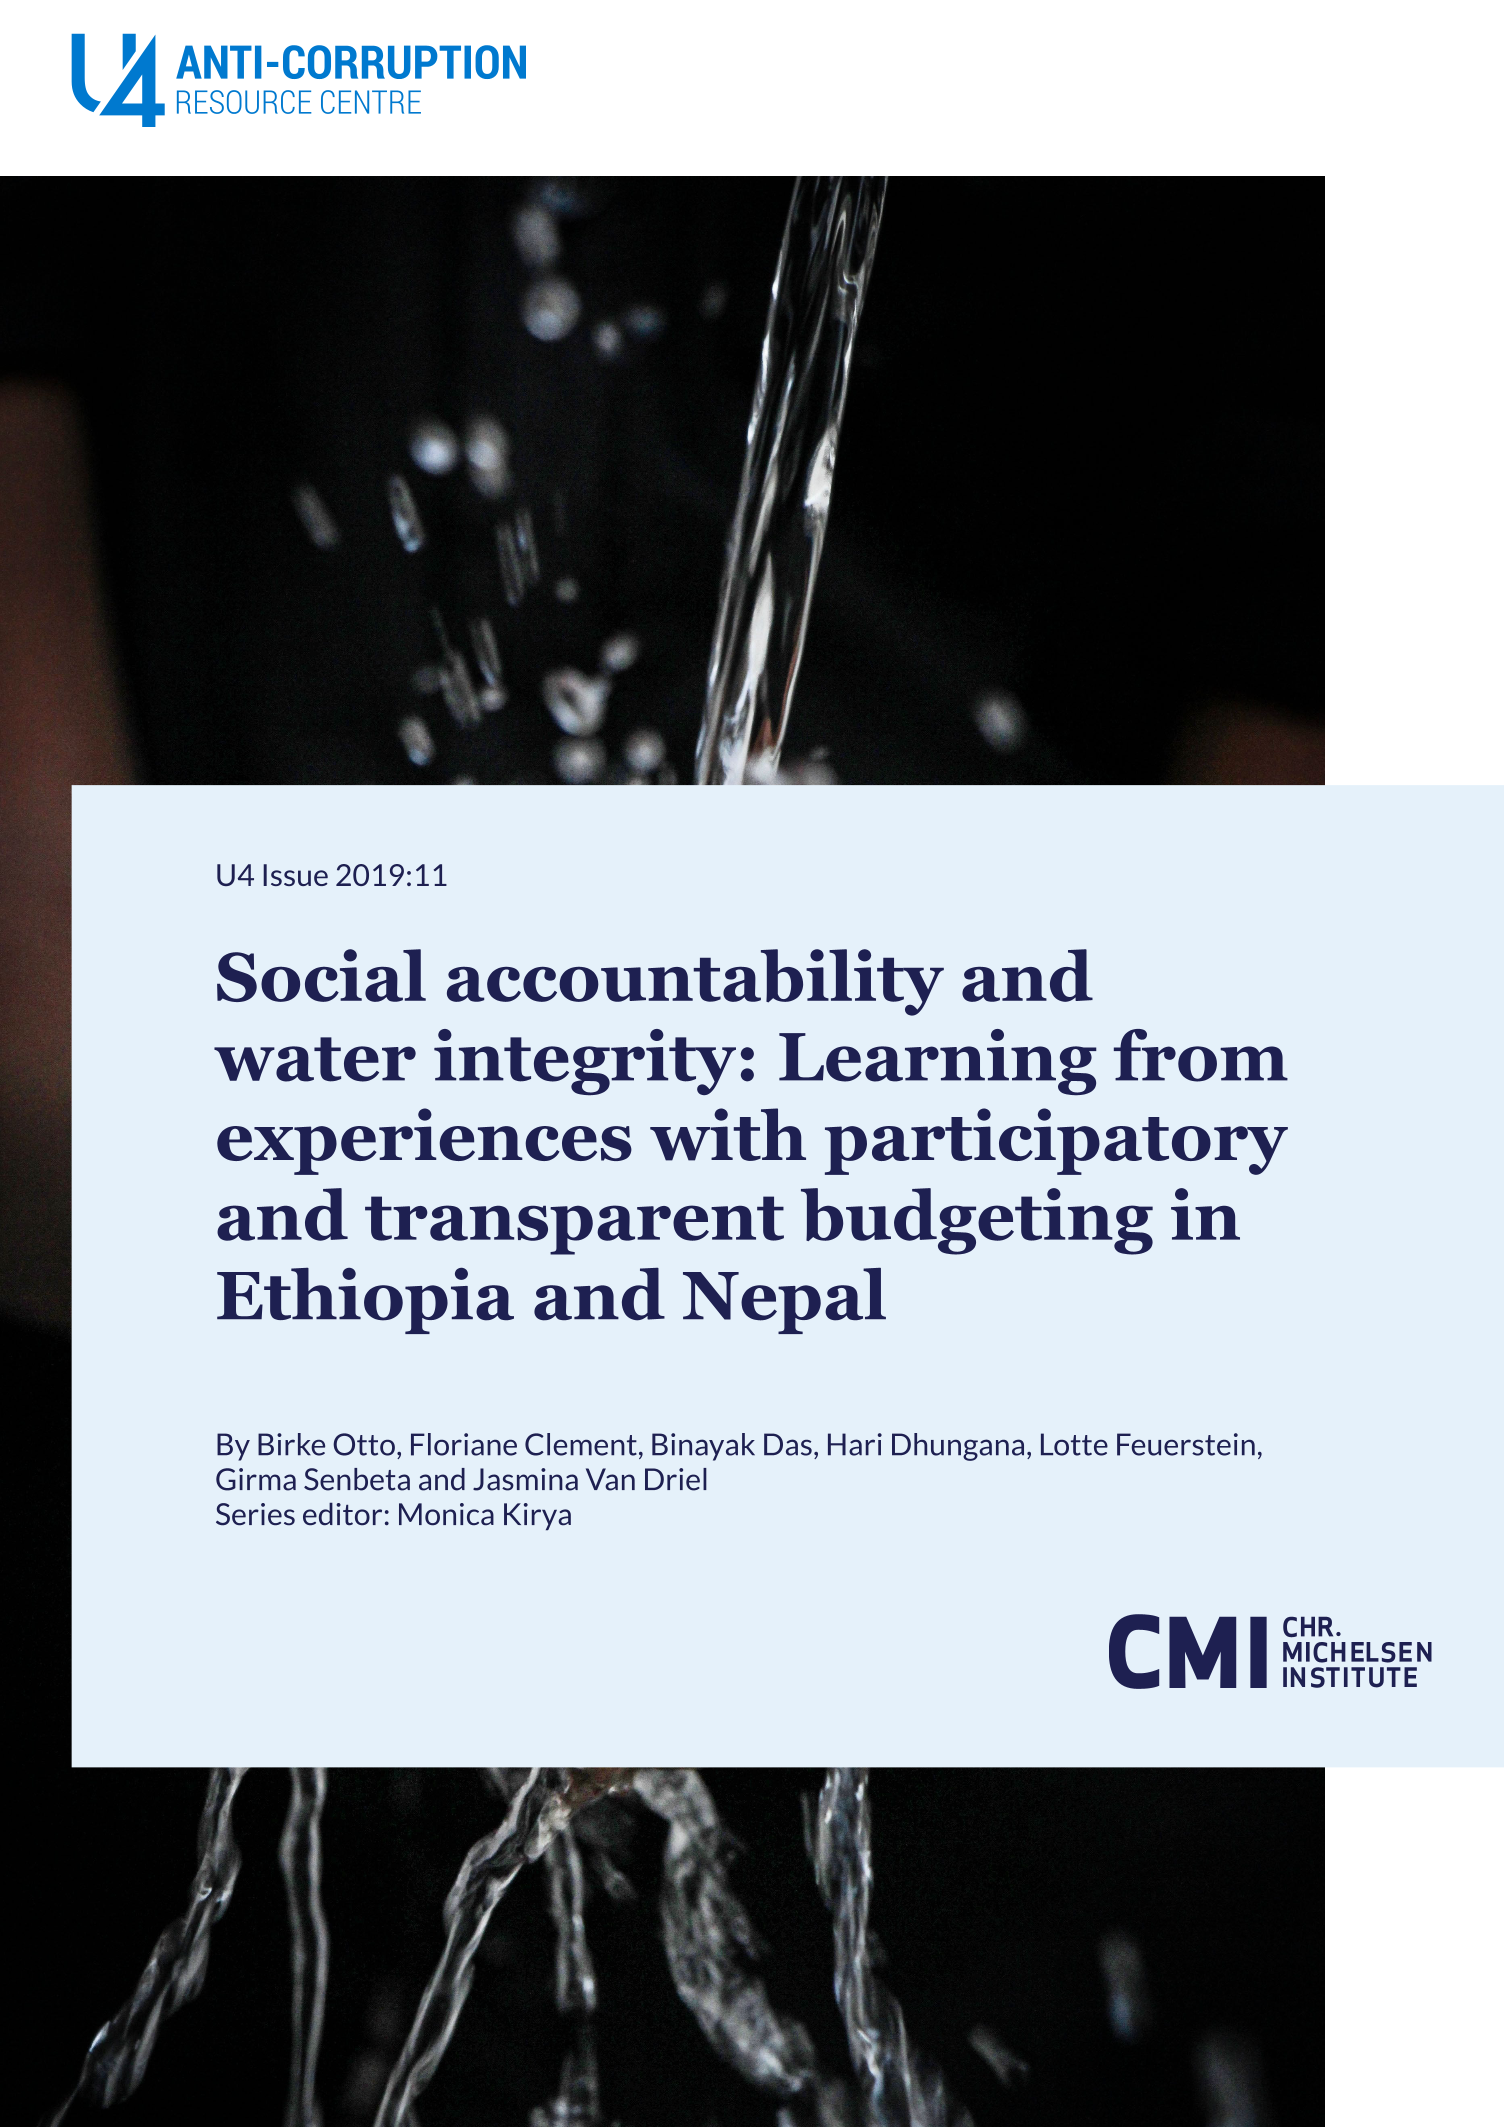 Social accountability and water integrity:  Learning from experiences with participatory and transparent budgeting in Ethiopia and Nepal